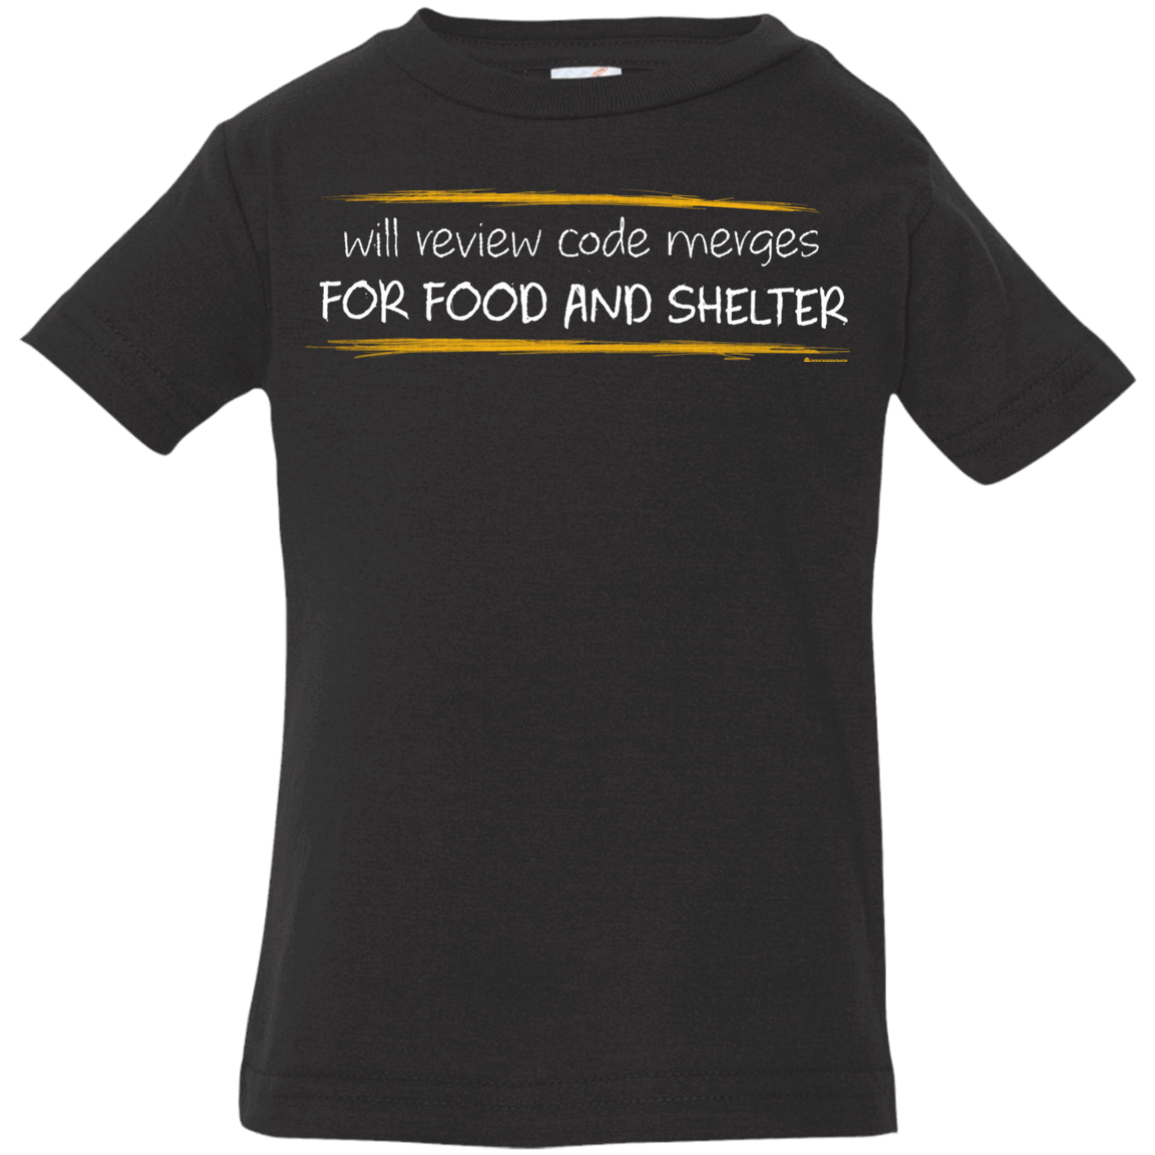 T-Shirts Black / 6 Months Reviewing Code For Food And Shelter Infant Premium T-Shirt